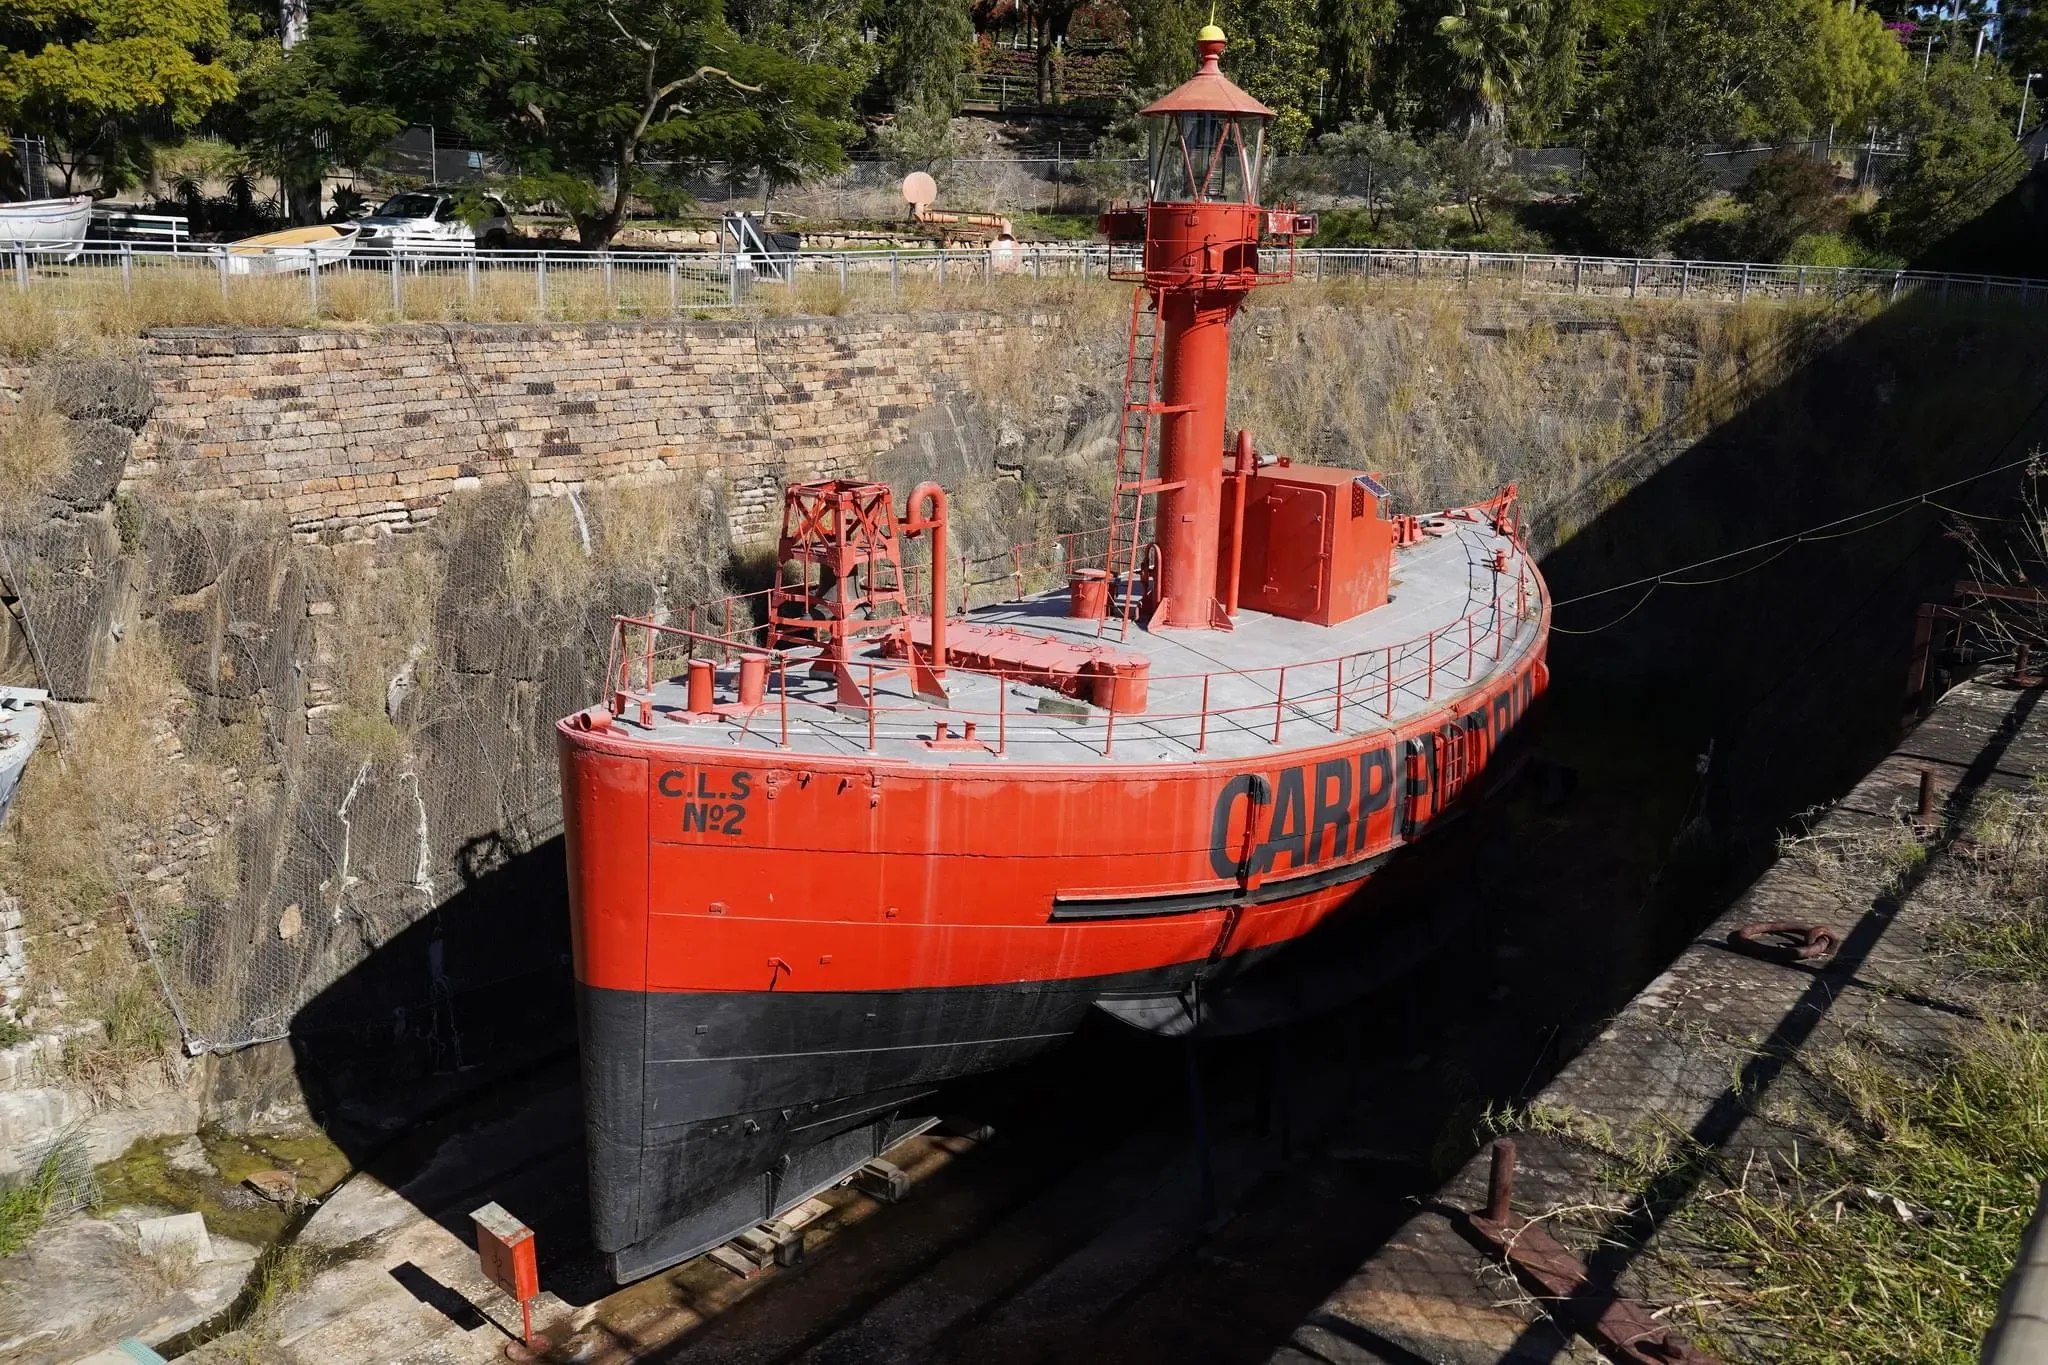 218 photos of Floating Lighthouse Beacon in Dry Dock